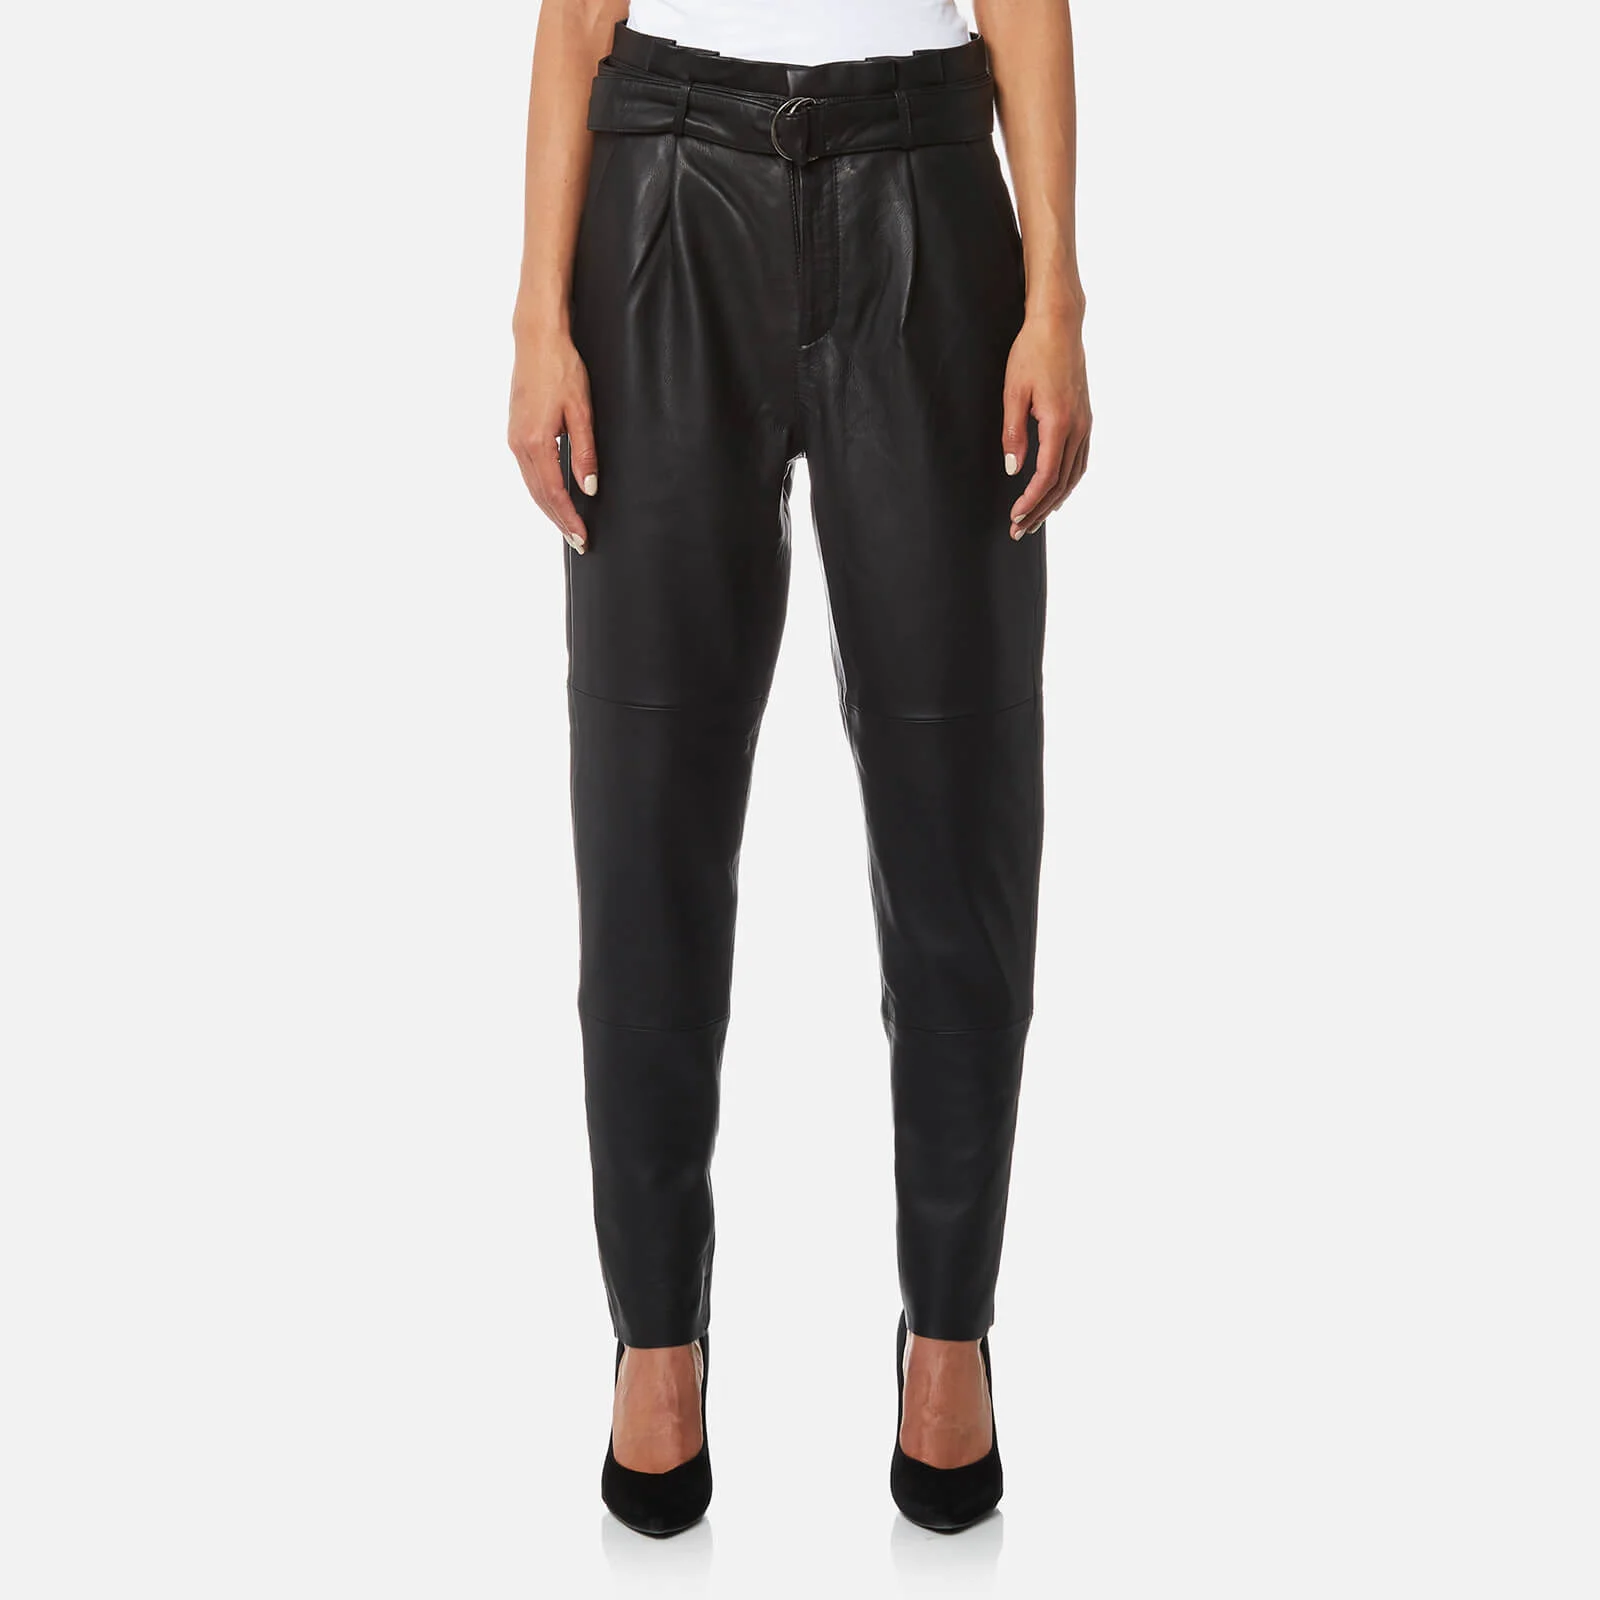 Gestuz Women's Beth High Waisted Leather Trousers - Black Image 1